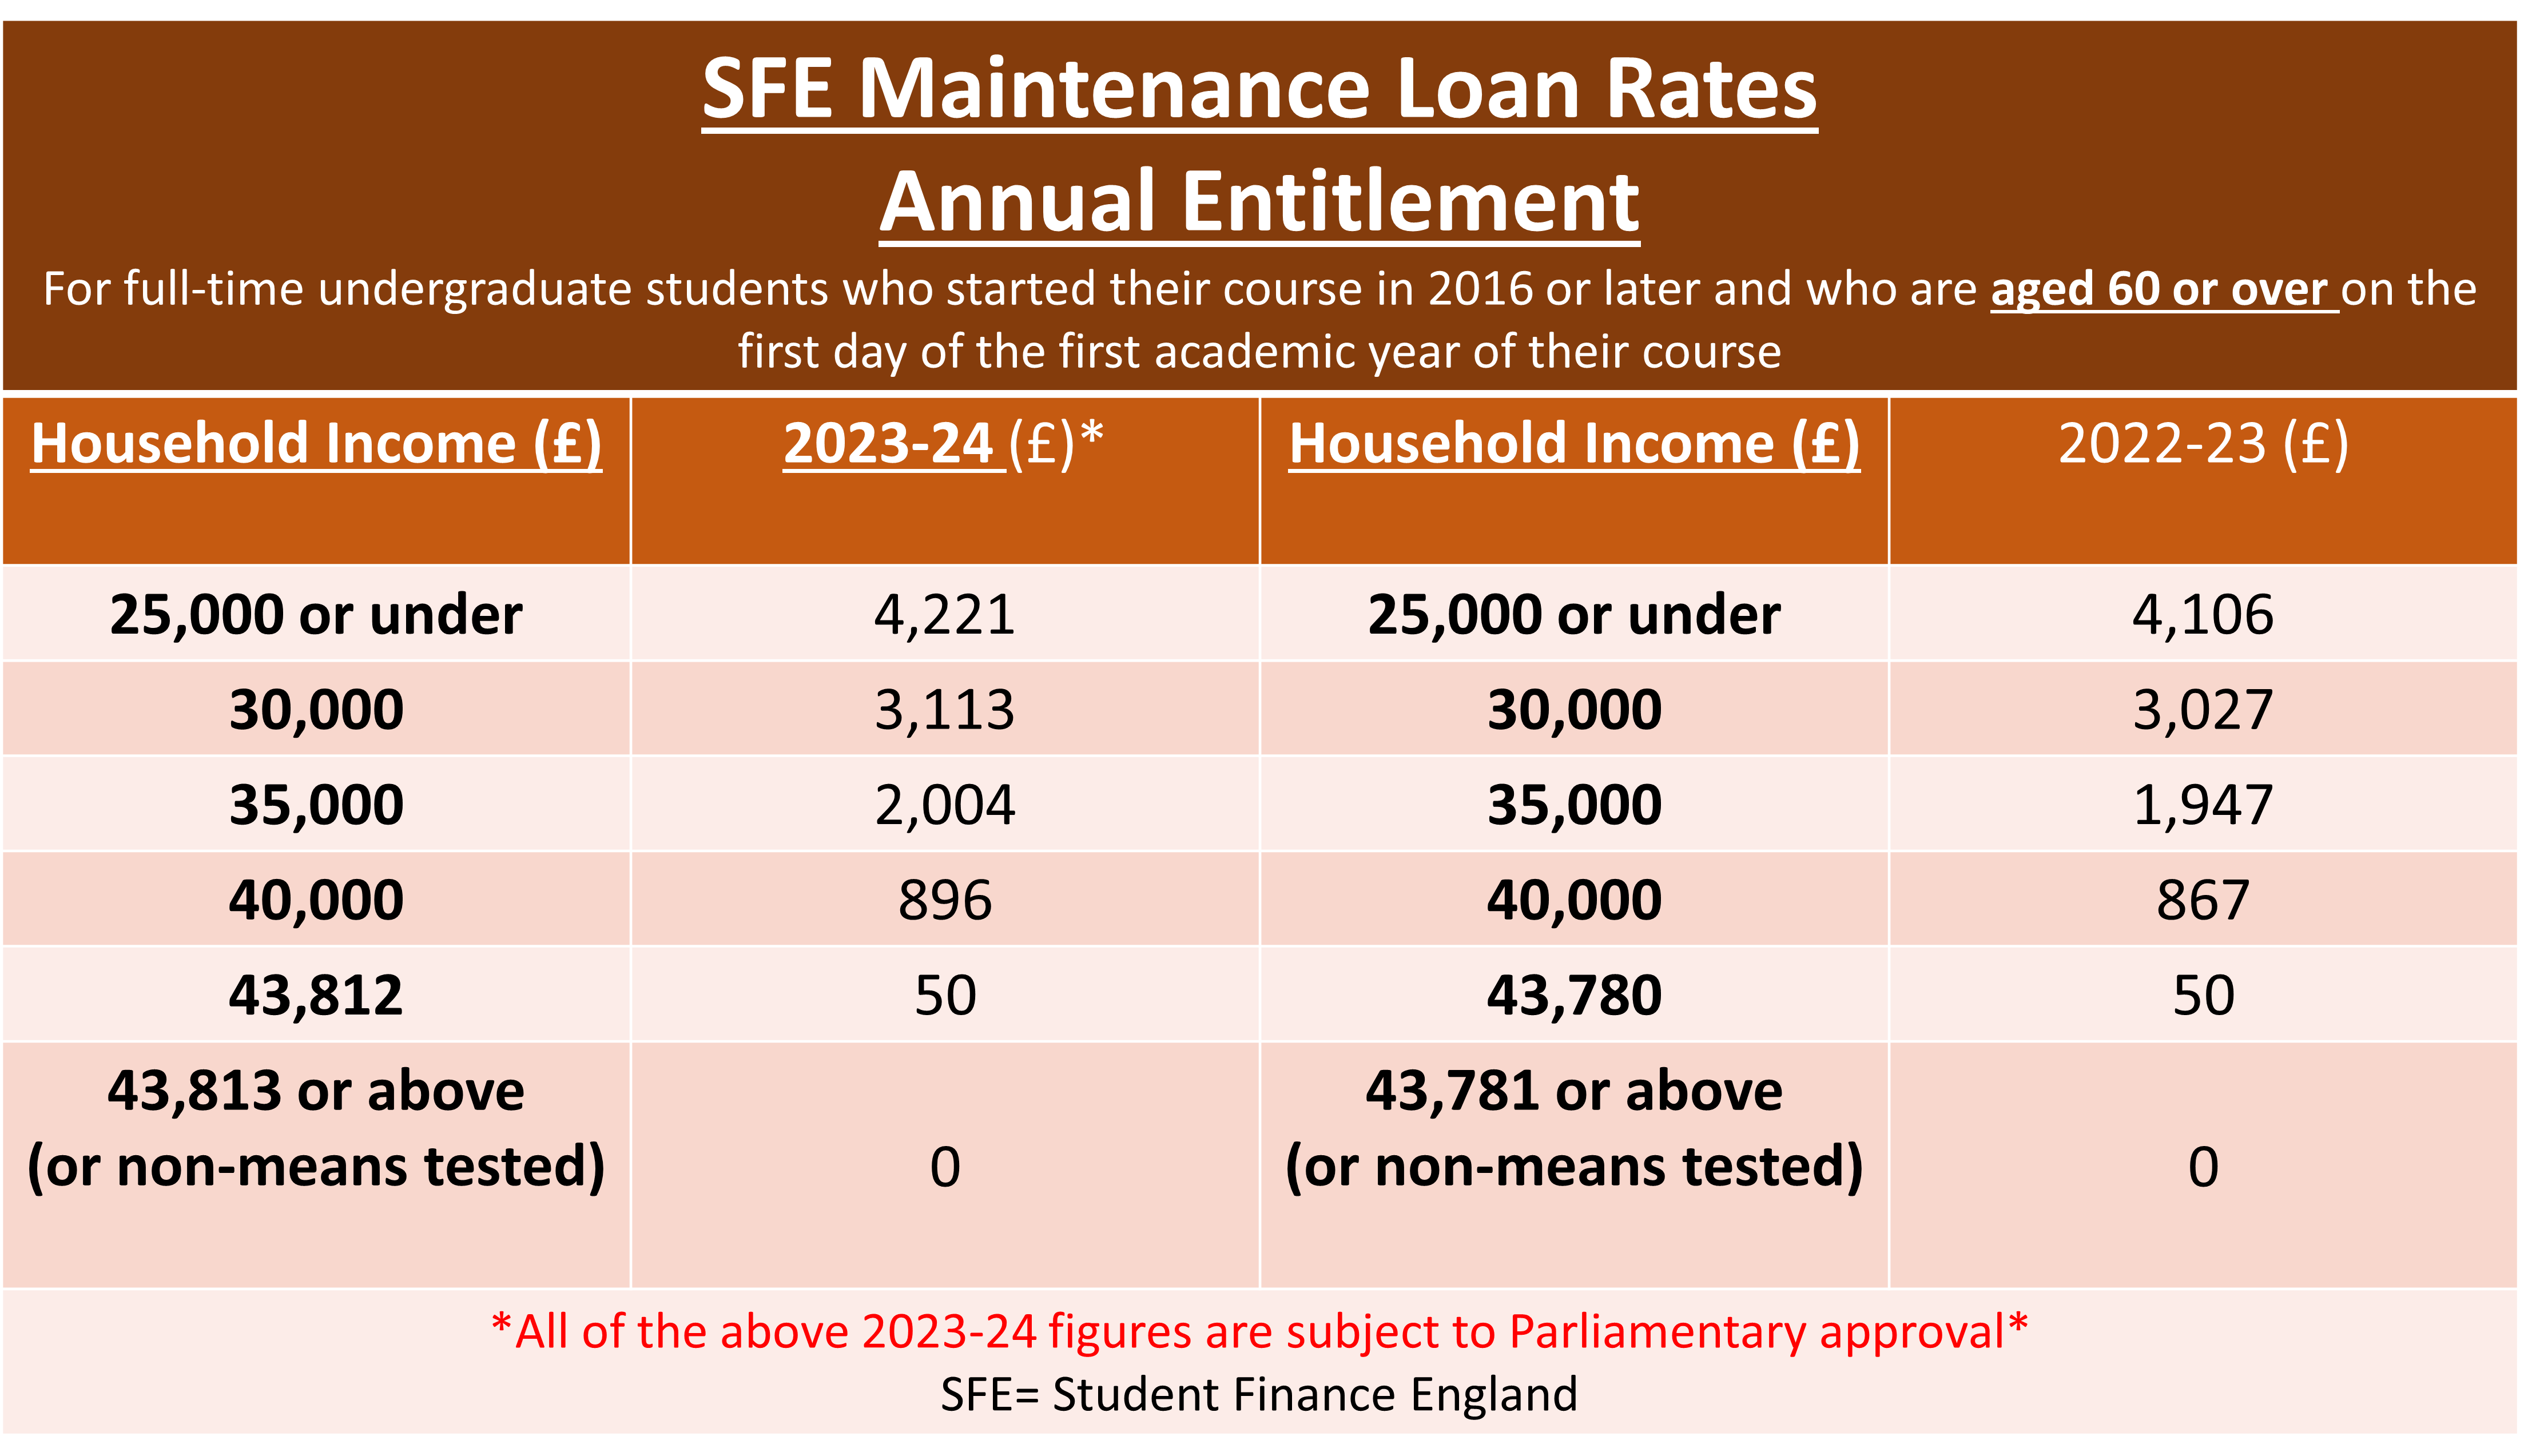 A table to show the 2023-24 maintenance loan rates for undergraduate students aged 60 or over on the first day of their first year of their academic course, based on their household income. Subject to parliamentary approval.